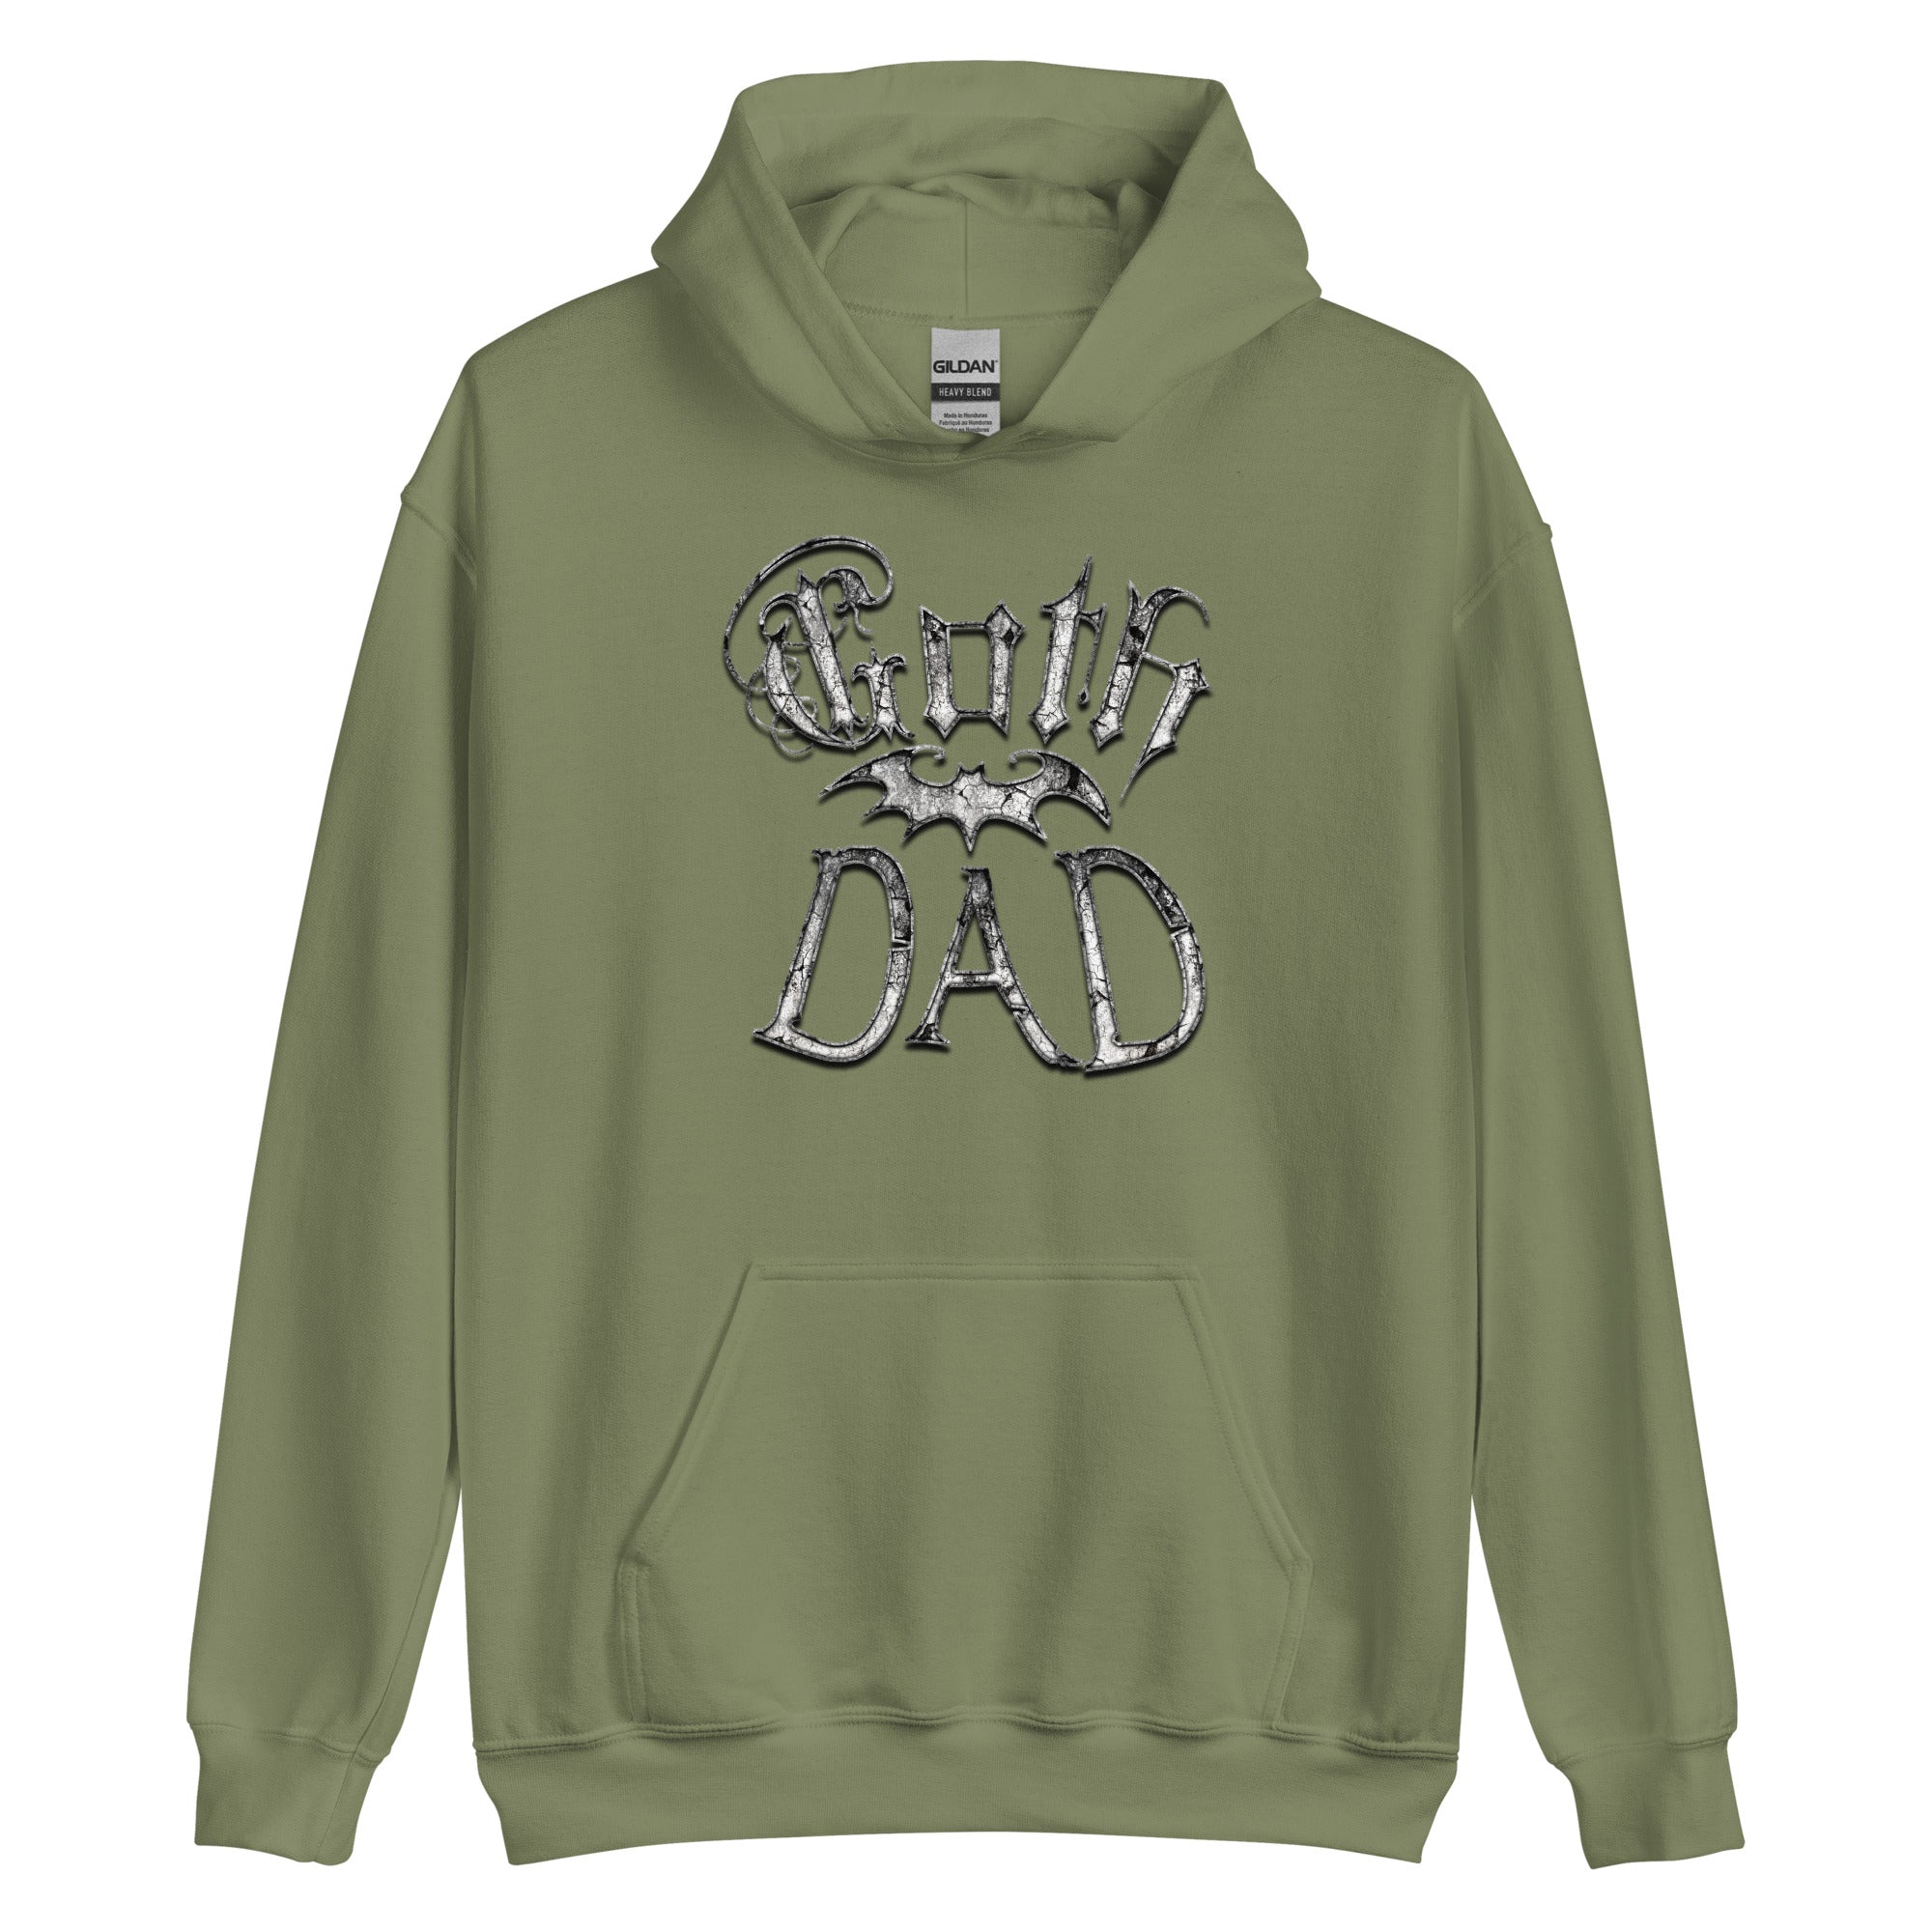 White Goth Dad with Bat Father's Day Gift Pullover Hoodie Sweatshirt